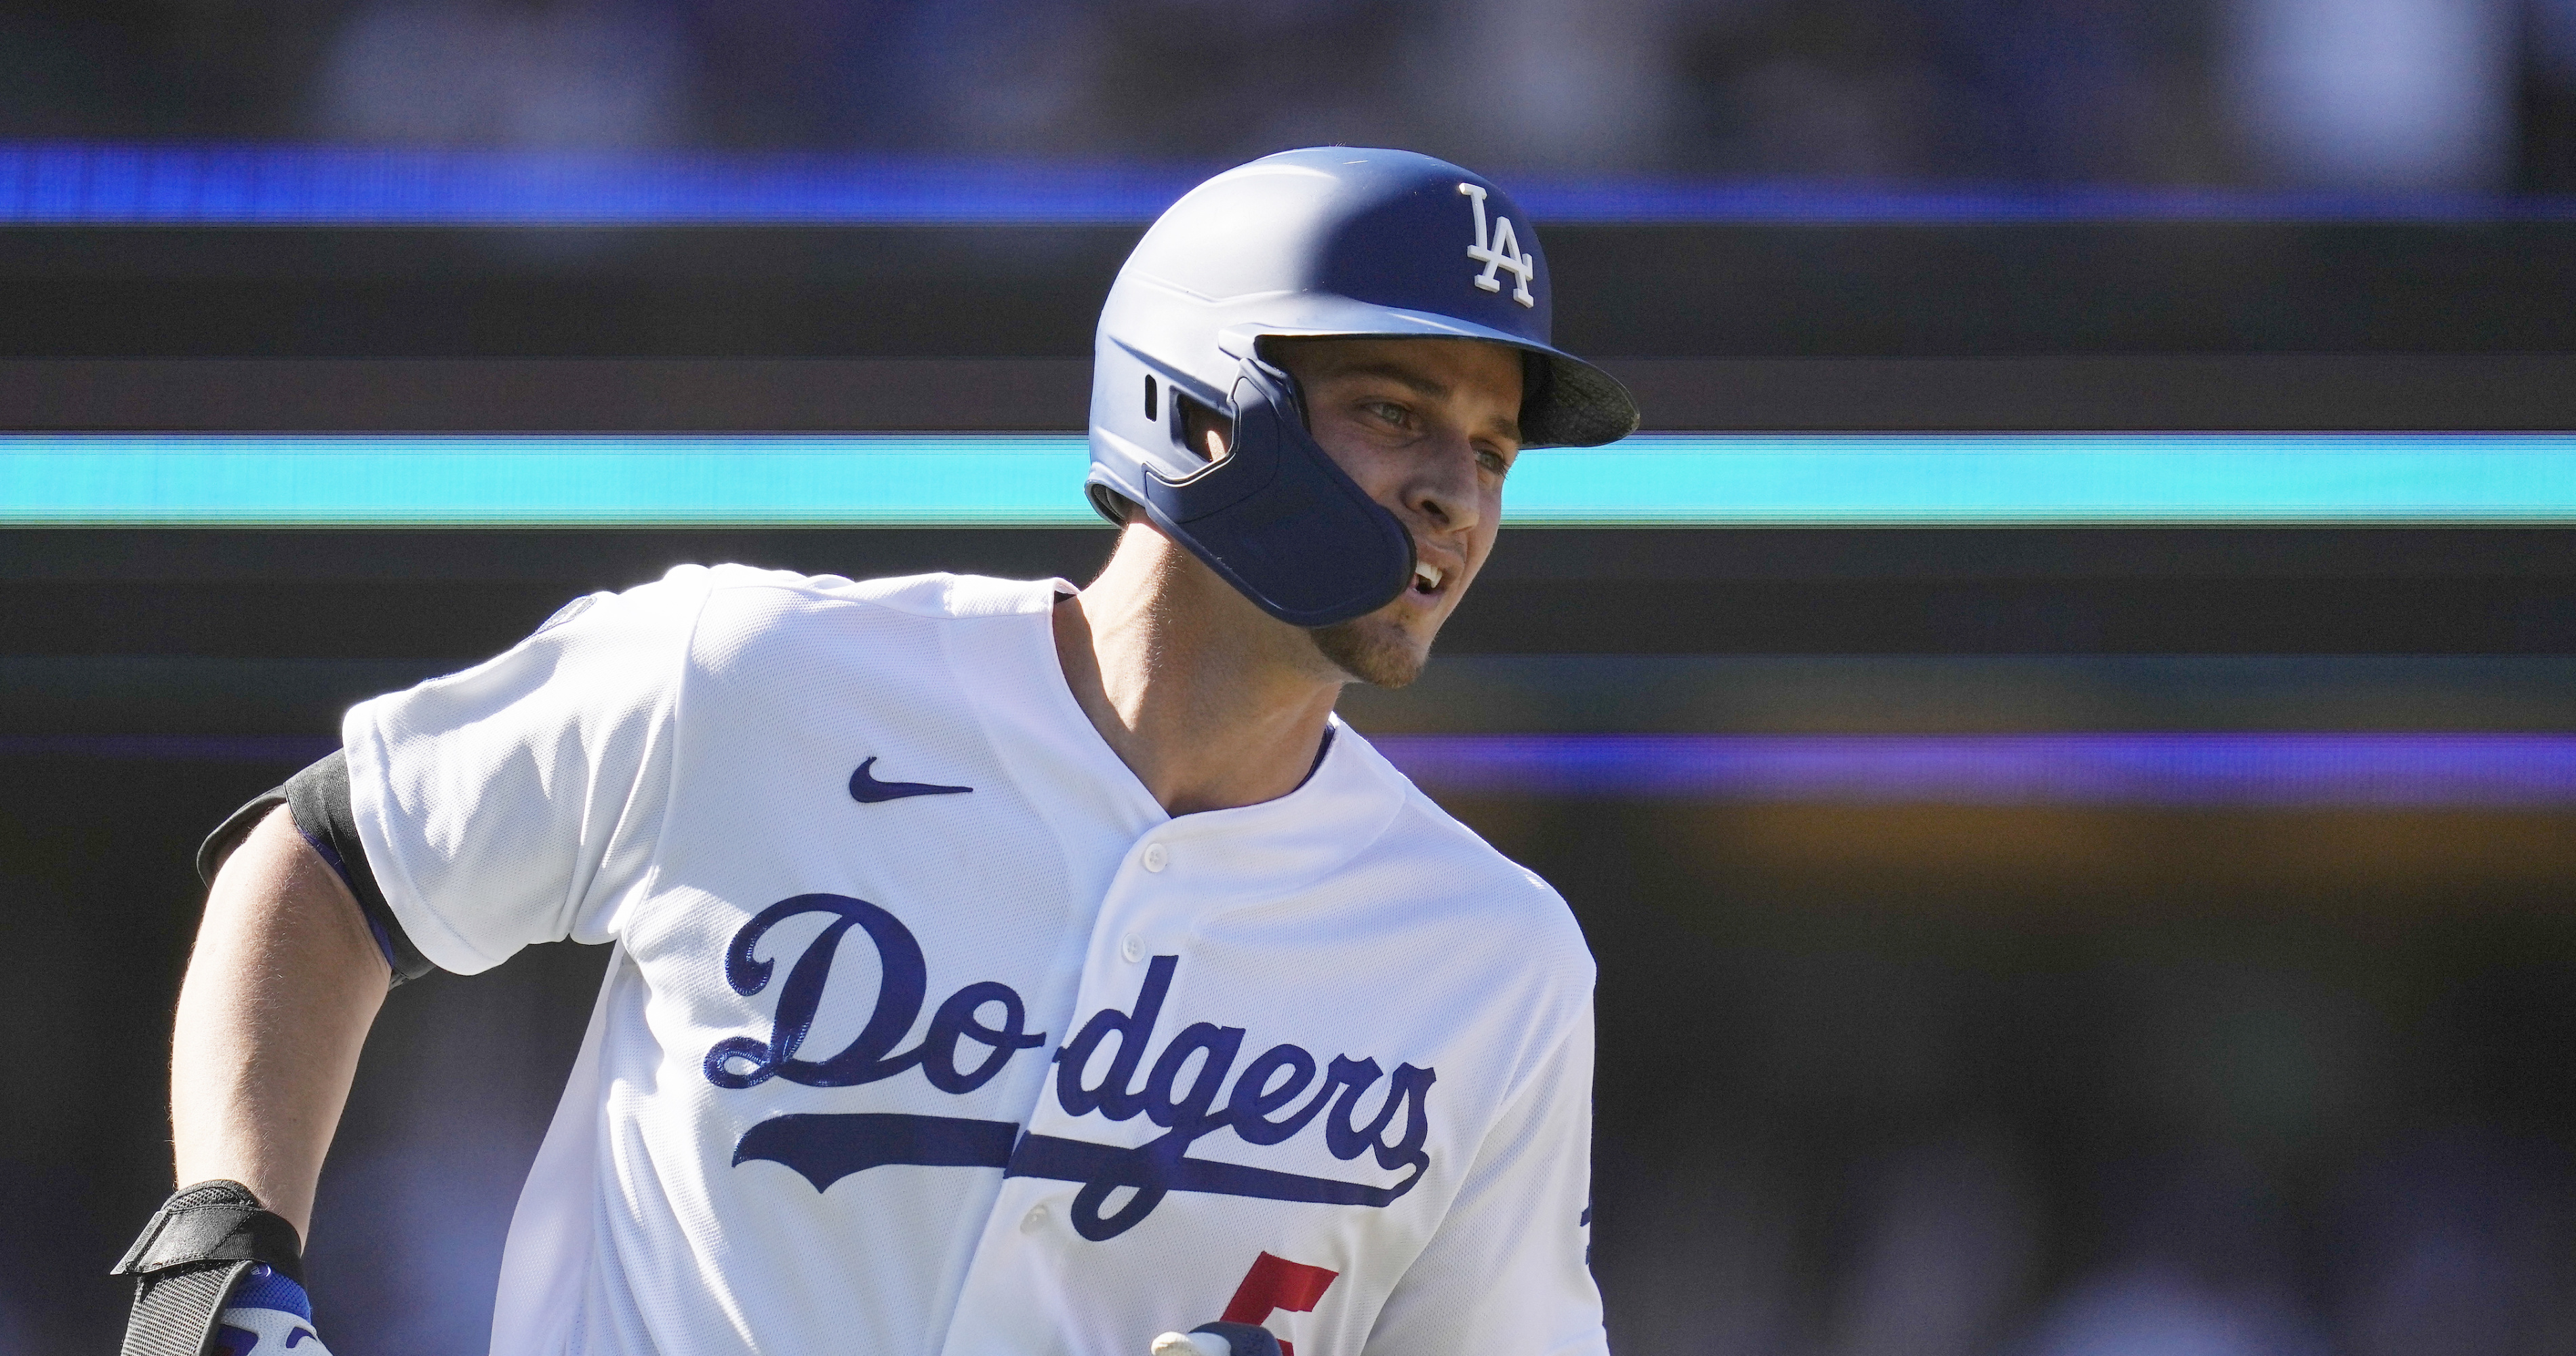 Marcus Semien and Corey Seager: New Contracts Close Gap Between